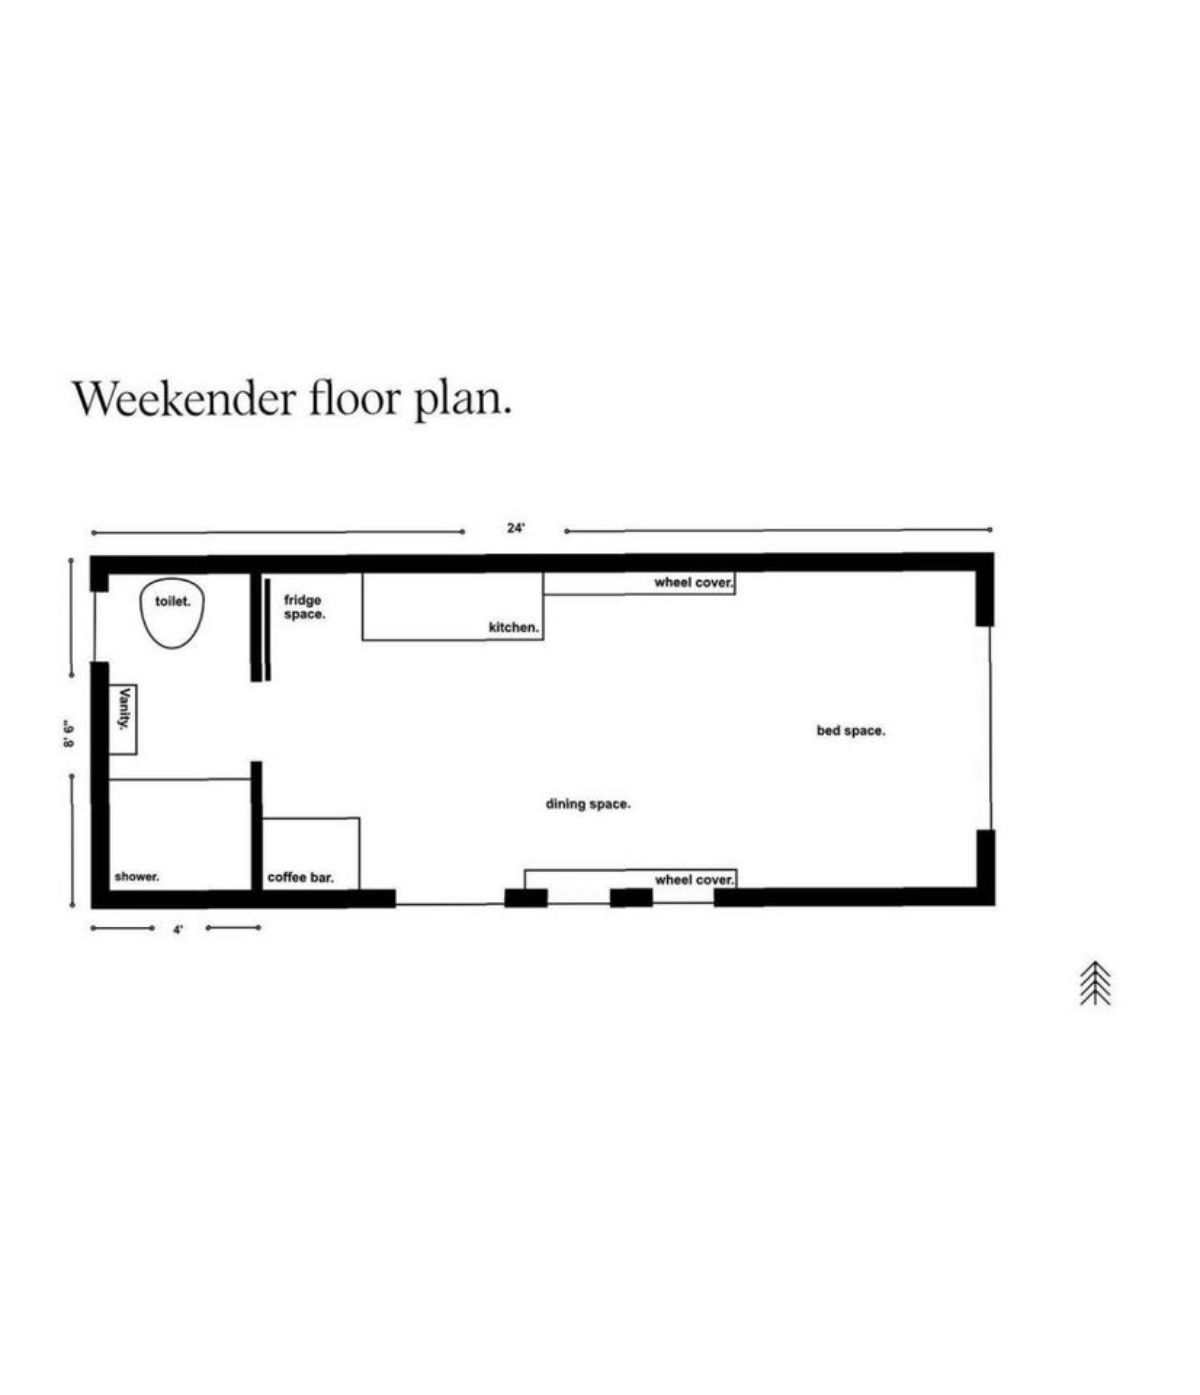 Floor plan of 24’ Weekender is the Perfect Nomadic Tiny Home